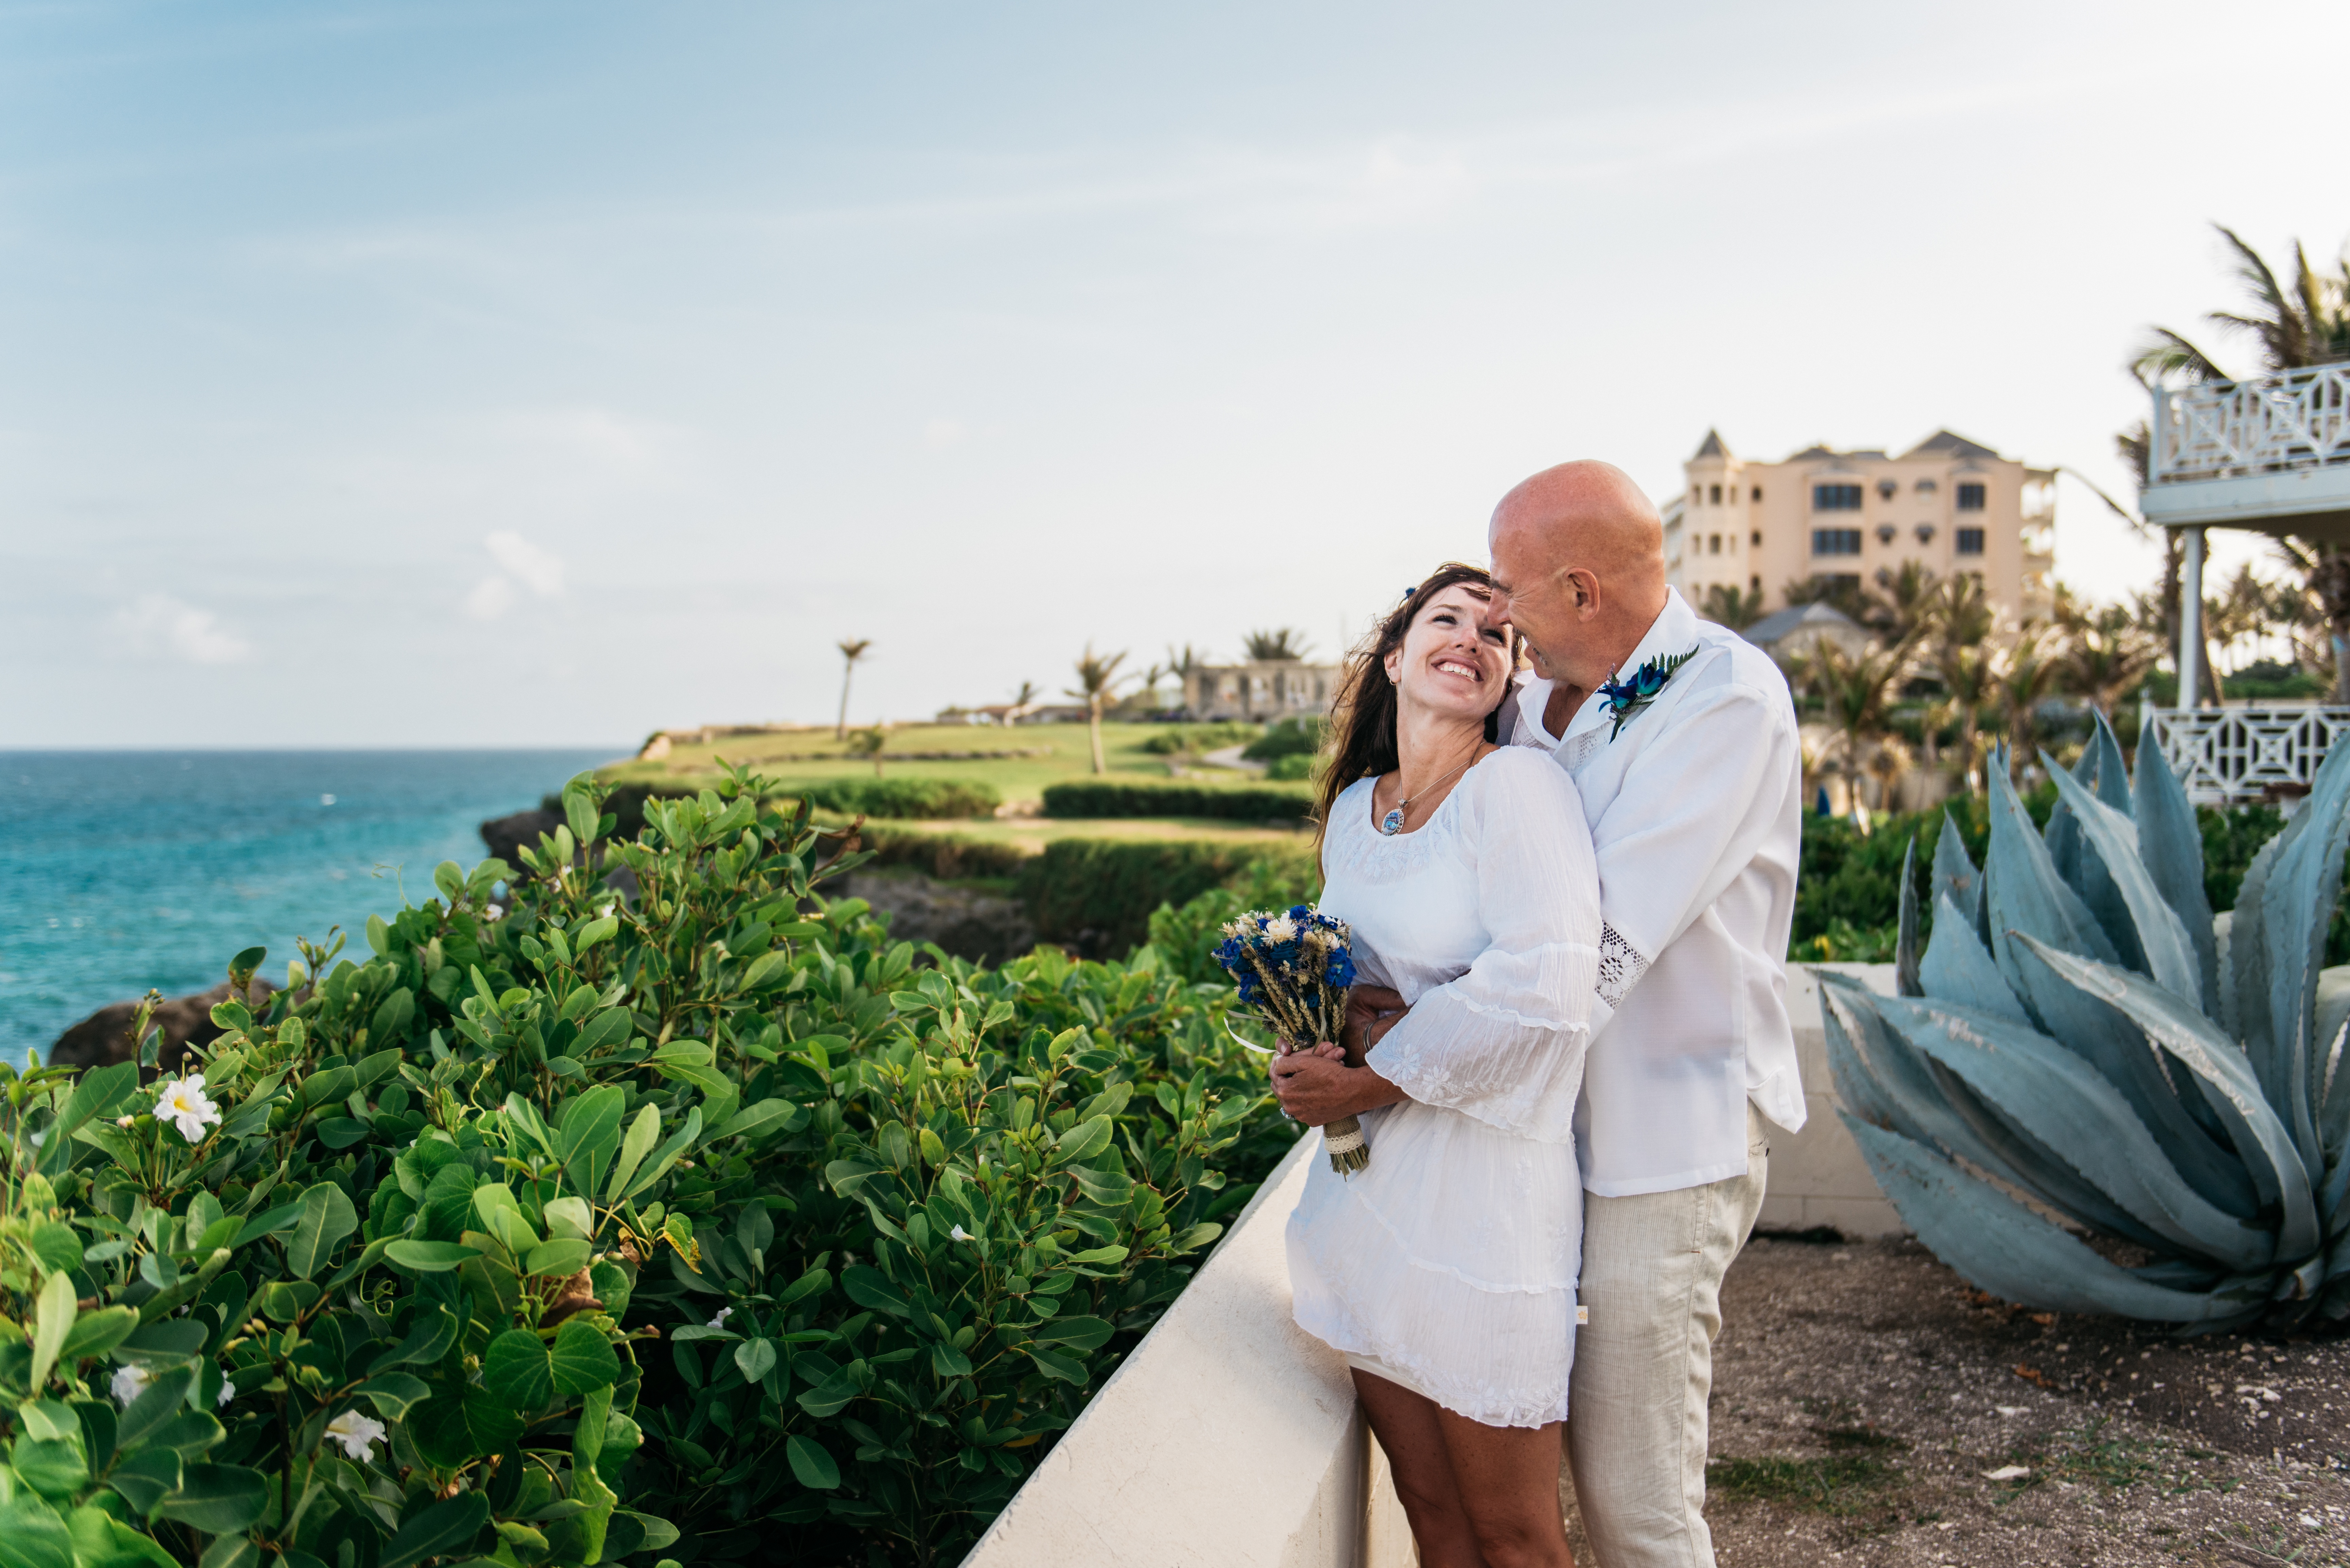 8 Tips for Planning a Destination Wedding